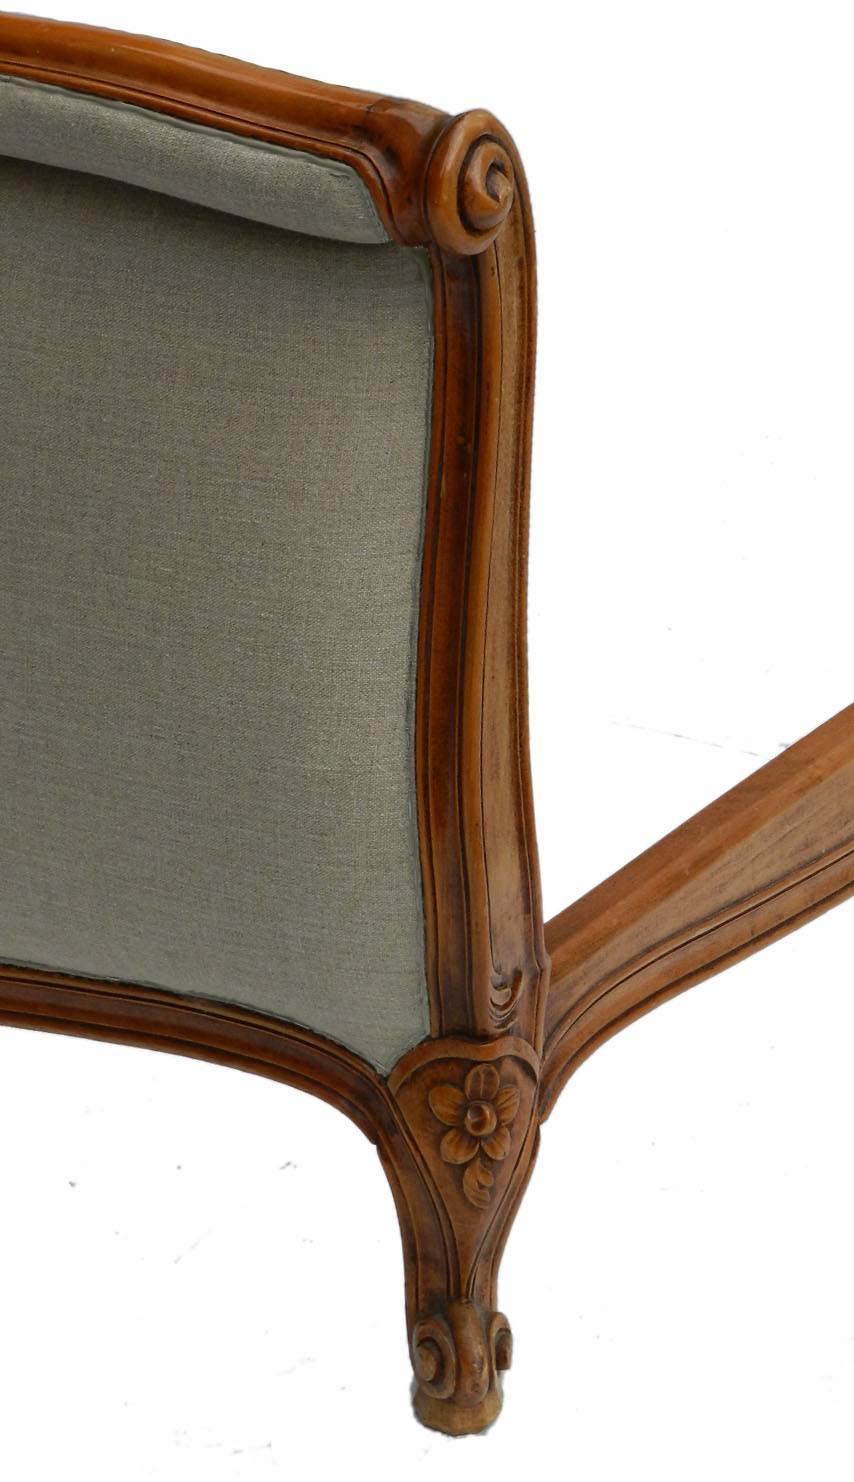 Louis XVI French Bed Scroll End Upholstered Natural Linen 20th Century Louis Rev Cherry